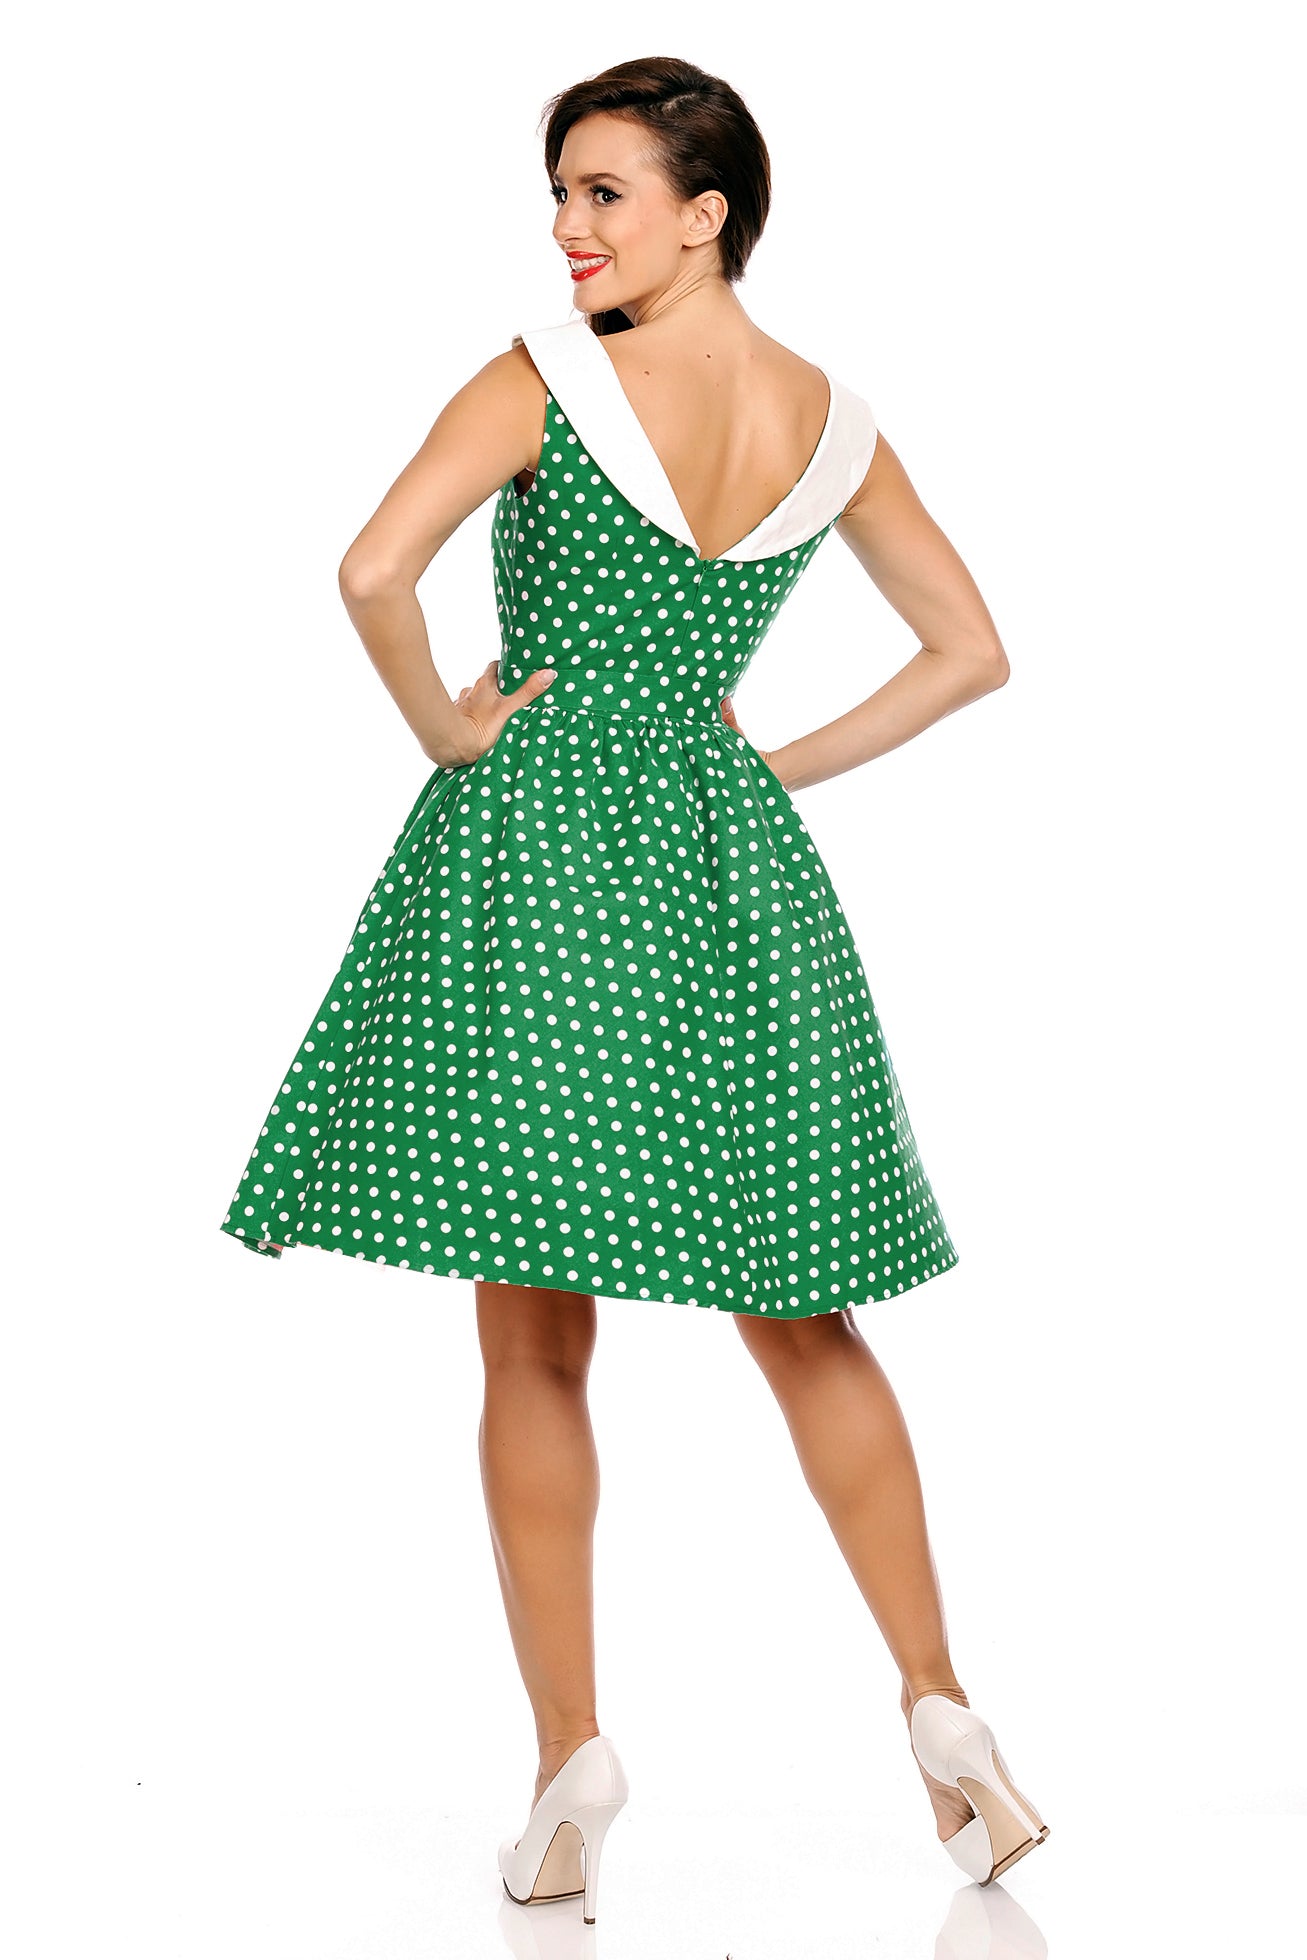 Model wearing our Cindy sleeveless dress, in green/white polka dot print, back view